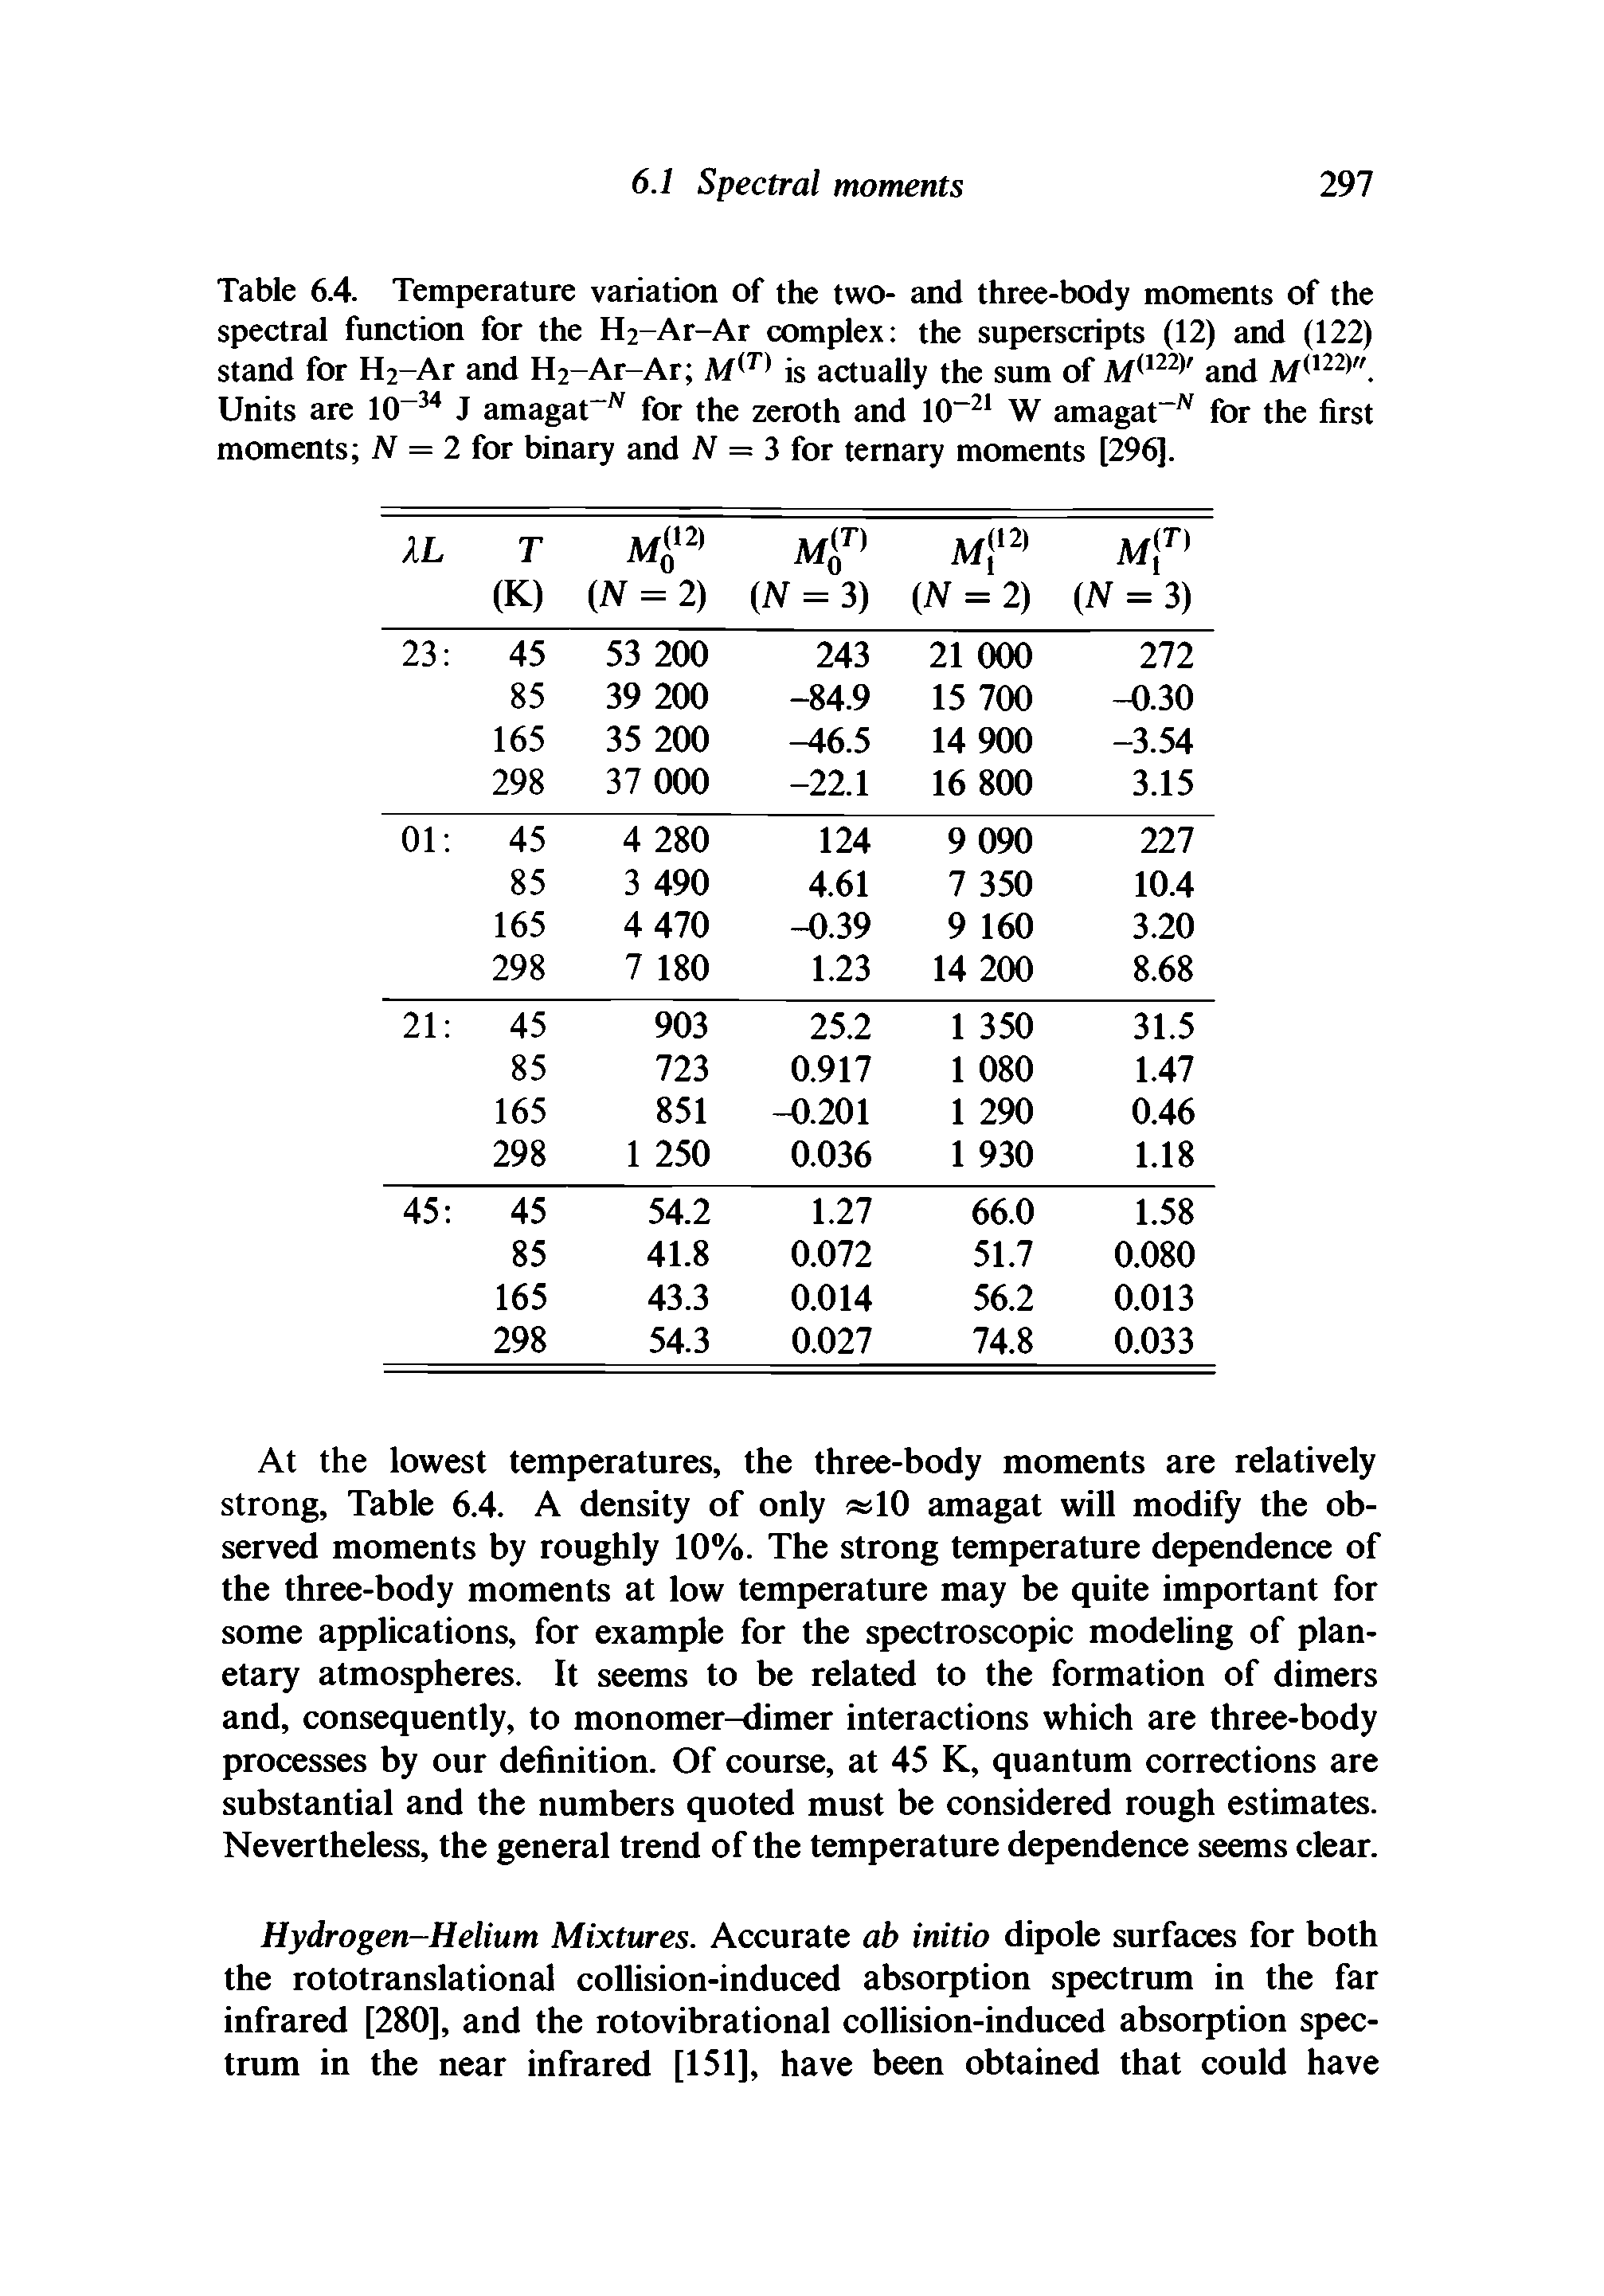 Table 6.4. Temperature variation of the two- and three-body moments of the spectral function for the H2-Ar-Ar complex the superscripts (12) and (122) stand for H2-Ar and H2-Ar-Ar M(T) is actually the sum of and M(122)".